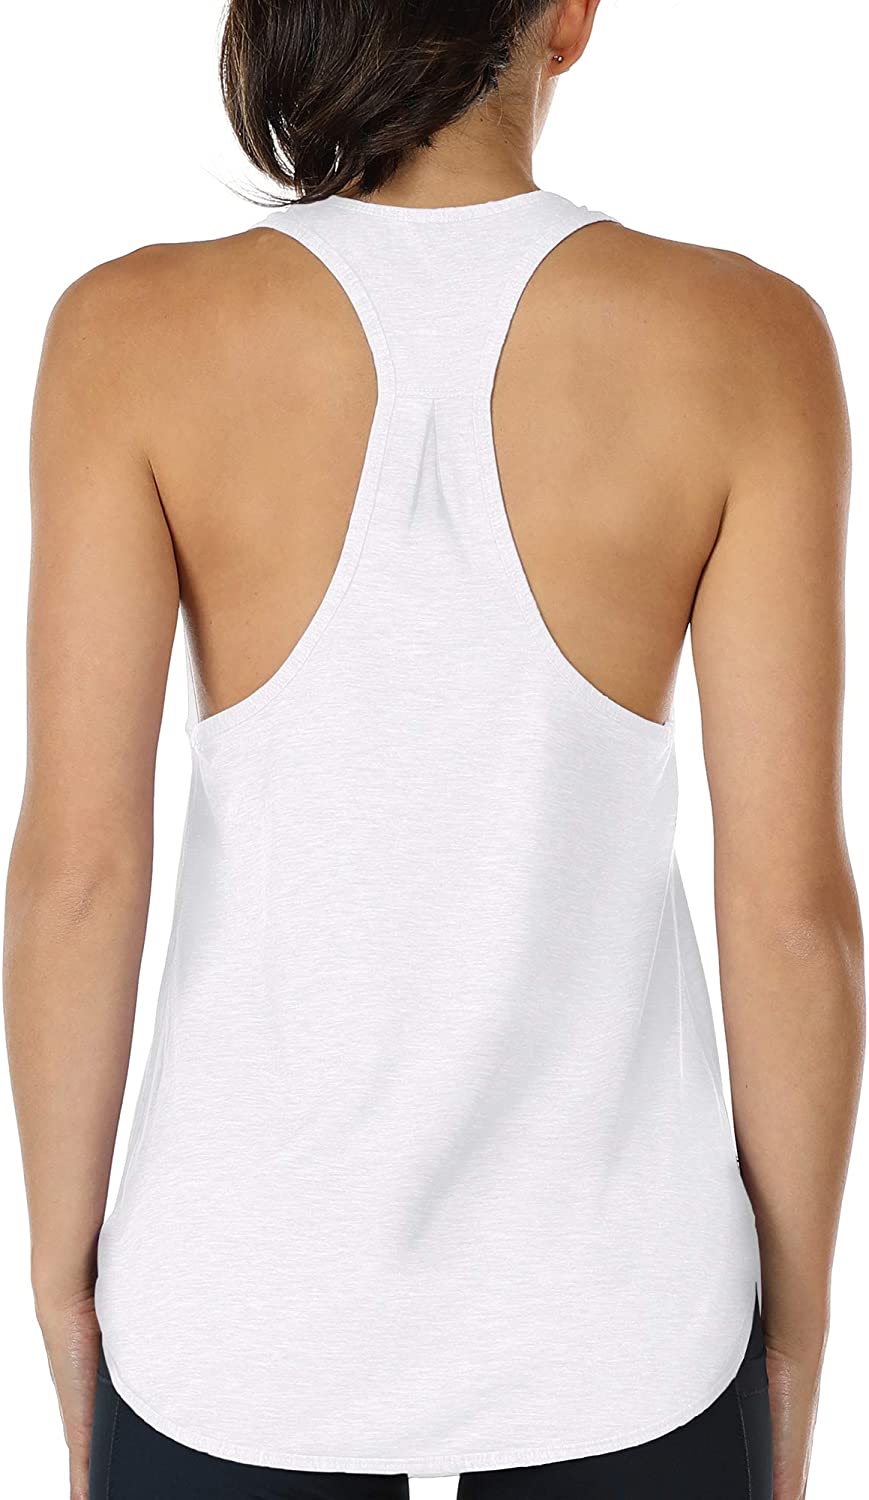 icyzone Workout Tank Tops for Women - Athletic Yoga Tops,, White, Size ...